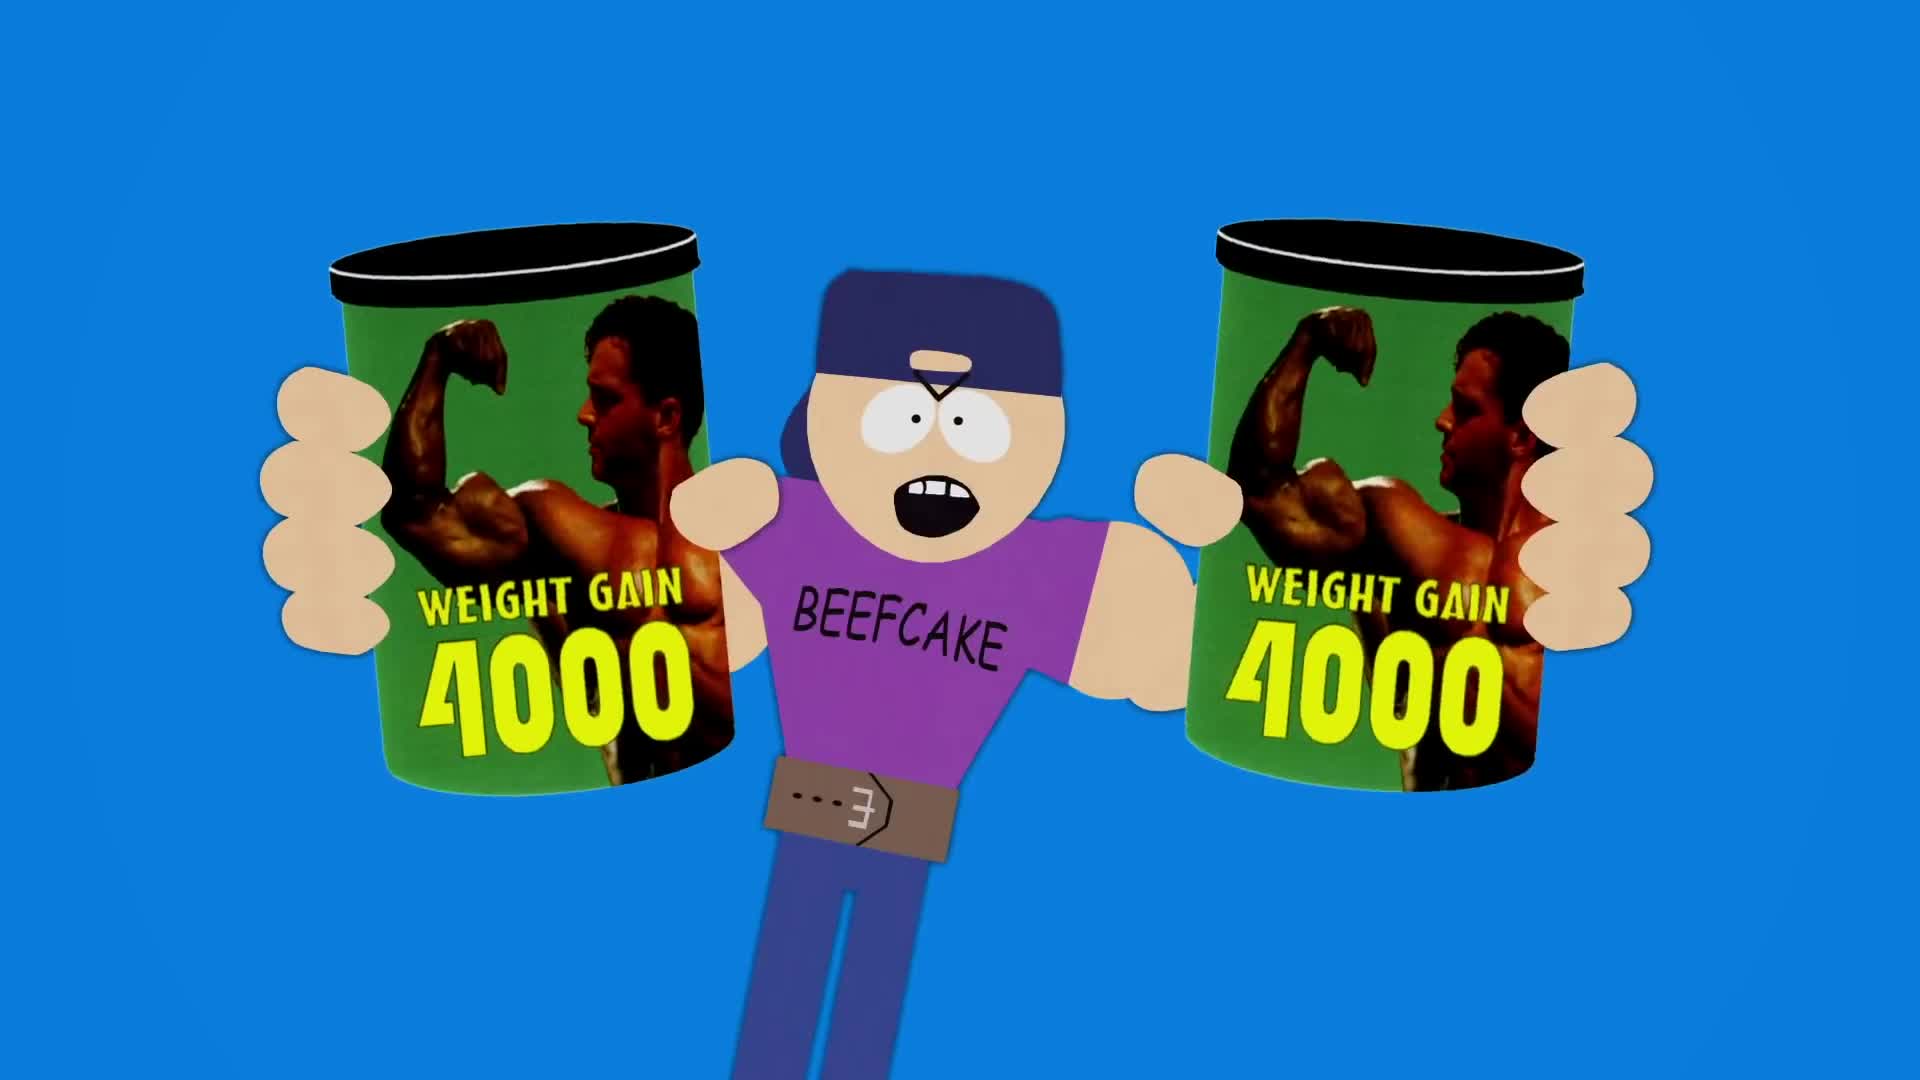 Goin’ Down to South Park Guide S 1 E 2: 'Weight Gain 4000'